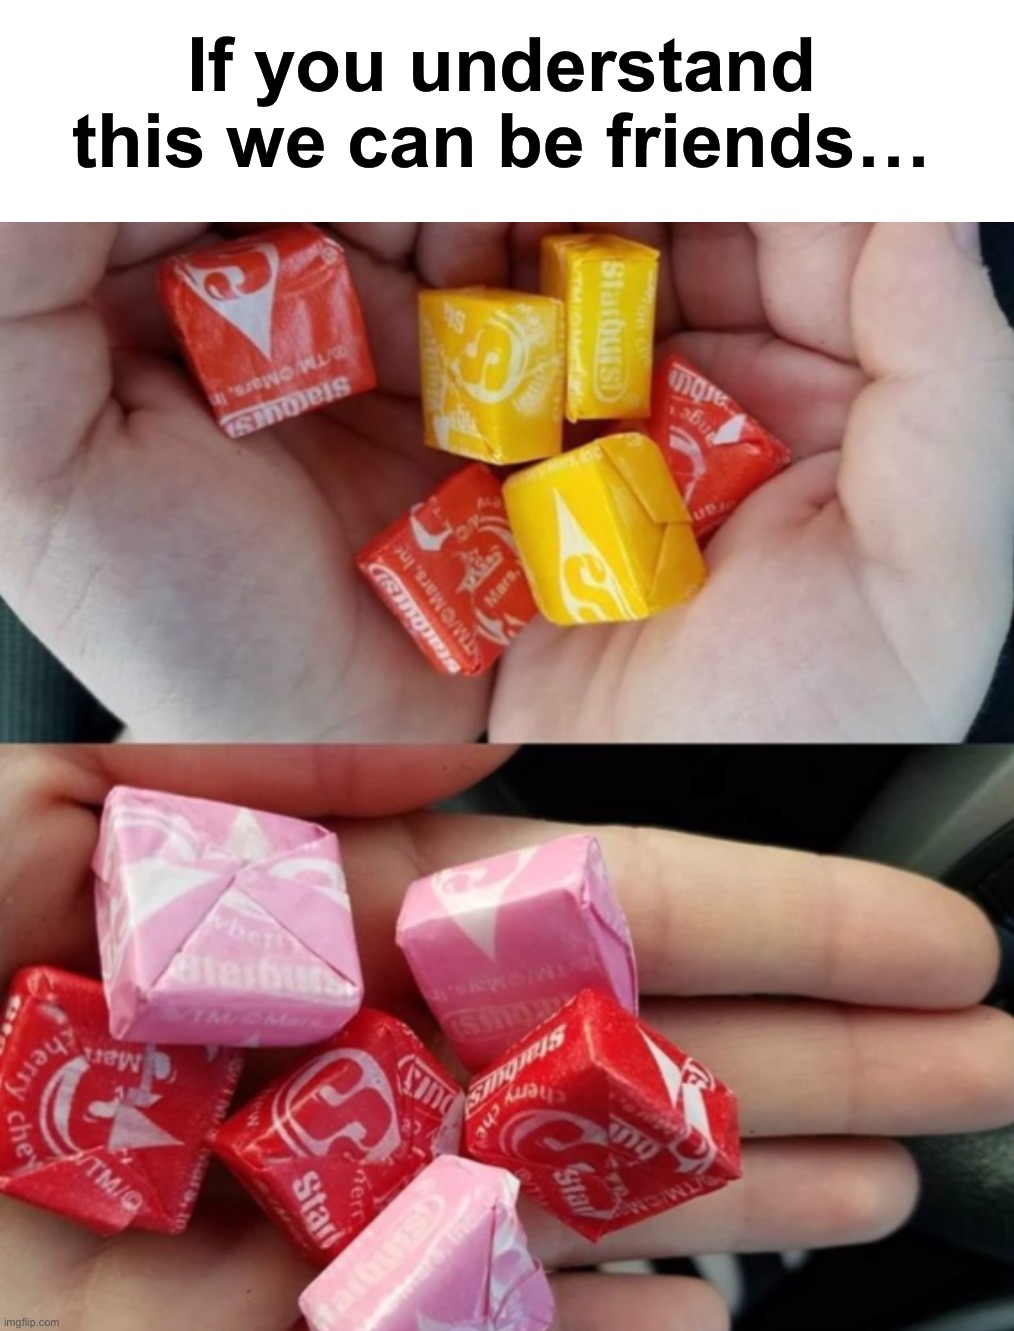 2nd one is me | If you understand this we can be friends… | image tagged in memes,funny,relatable memes,starbursts,candy,true story | made w/ Imgflip meme maker